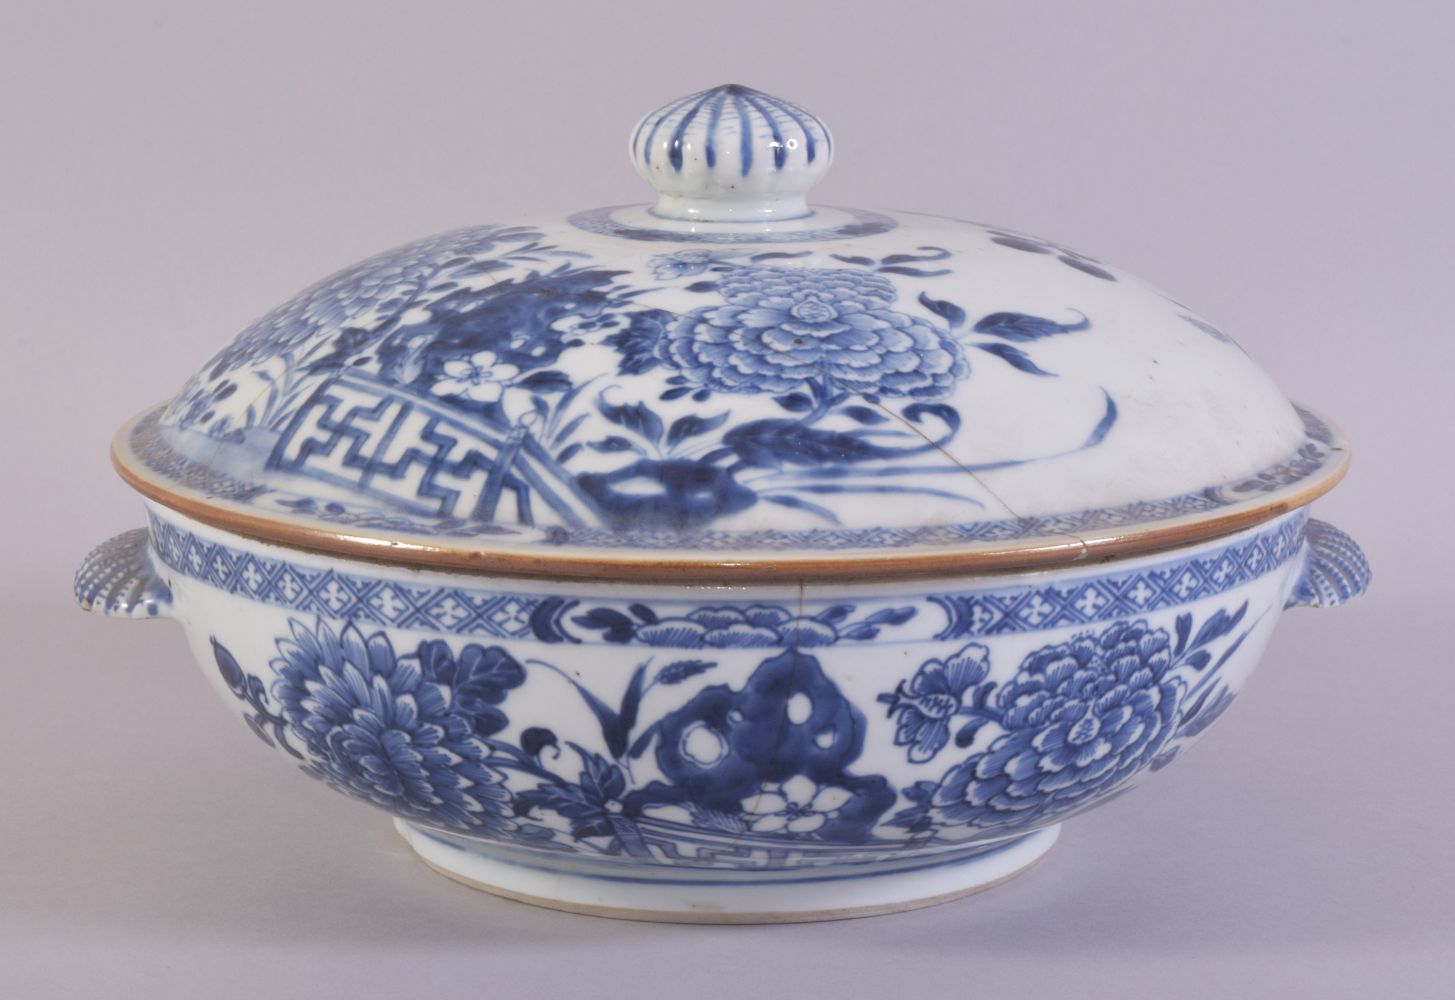 A CHINESE BLUE AND WHITE PORCELAIN CIRCULAR TUREEN AND COVER, painted with native flora, the